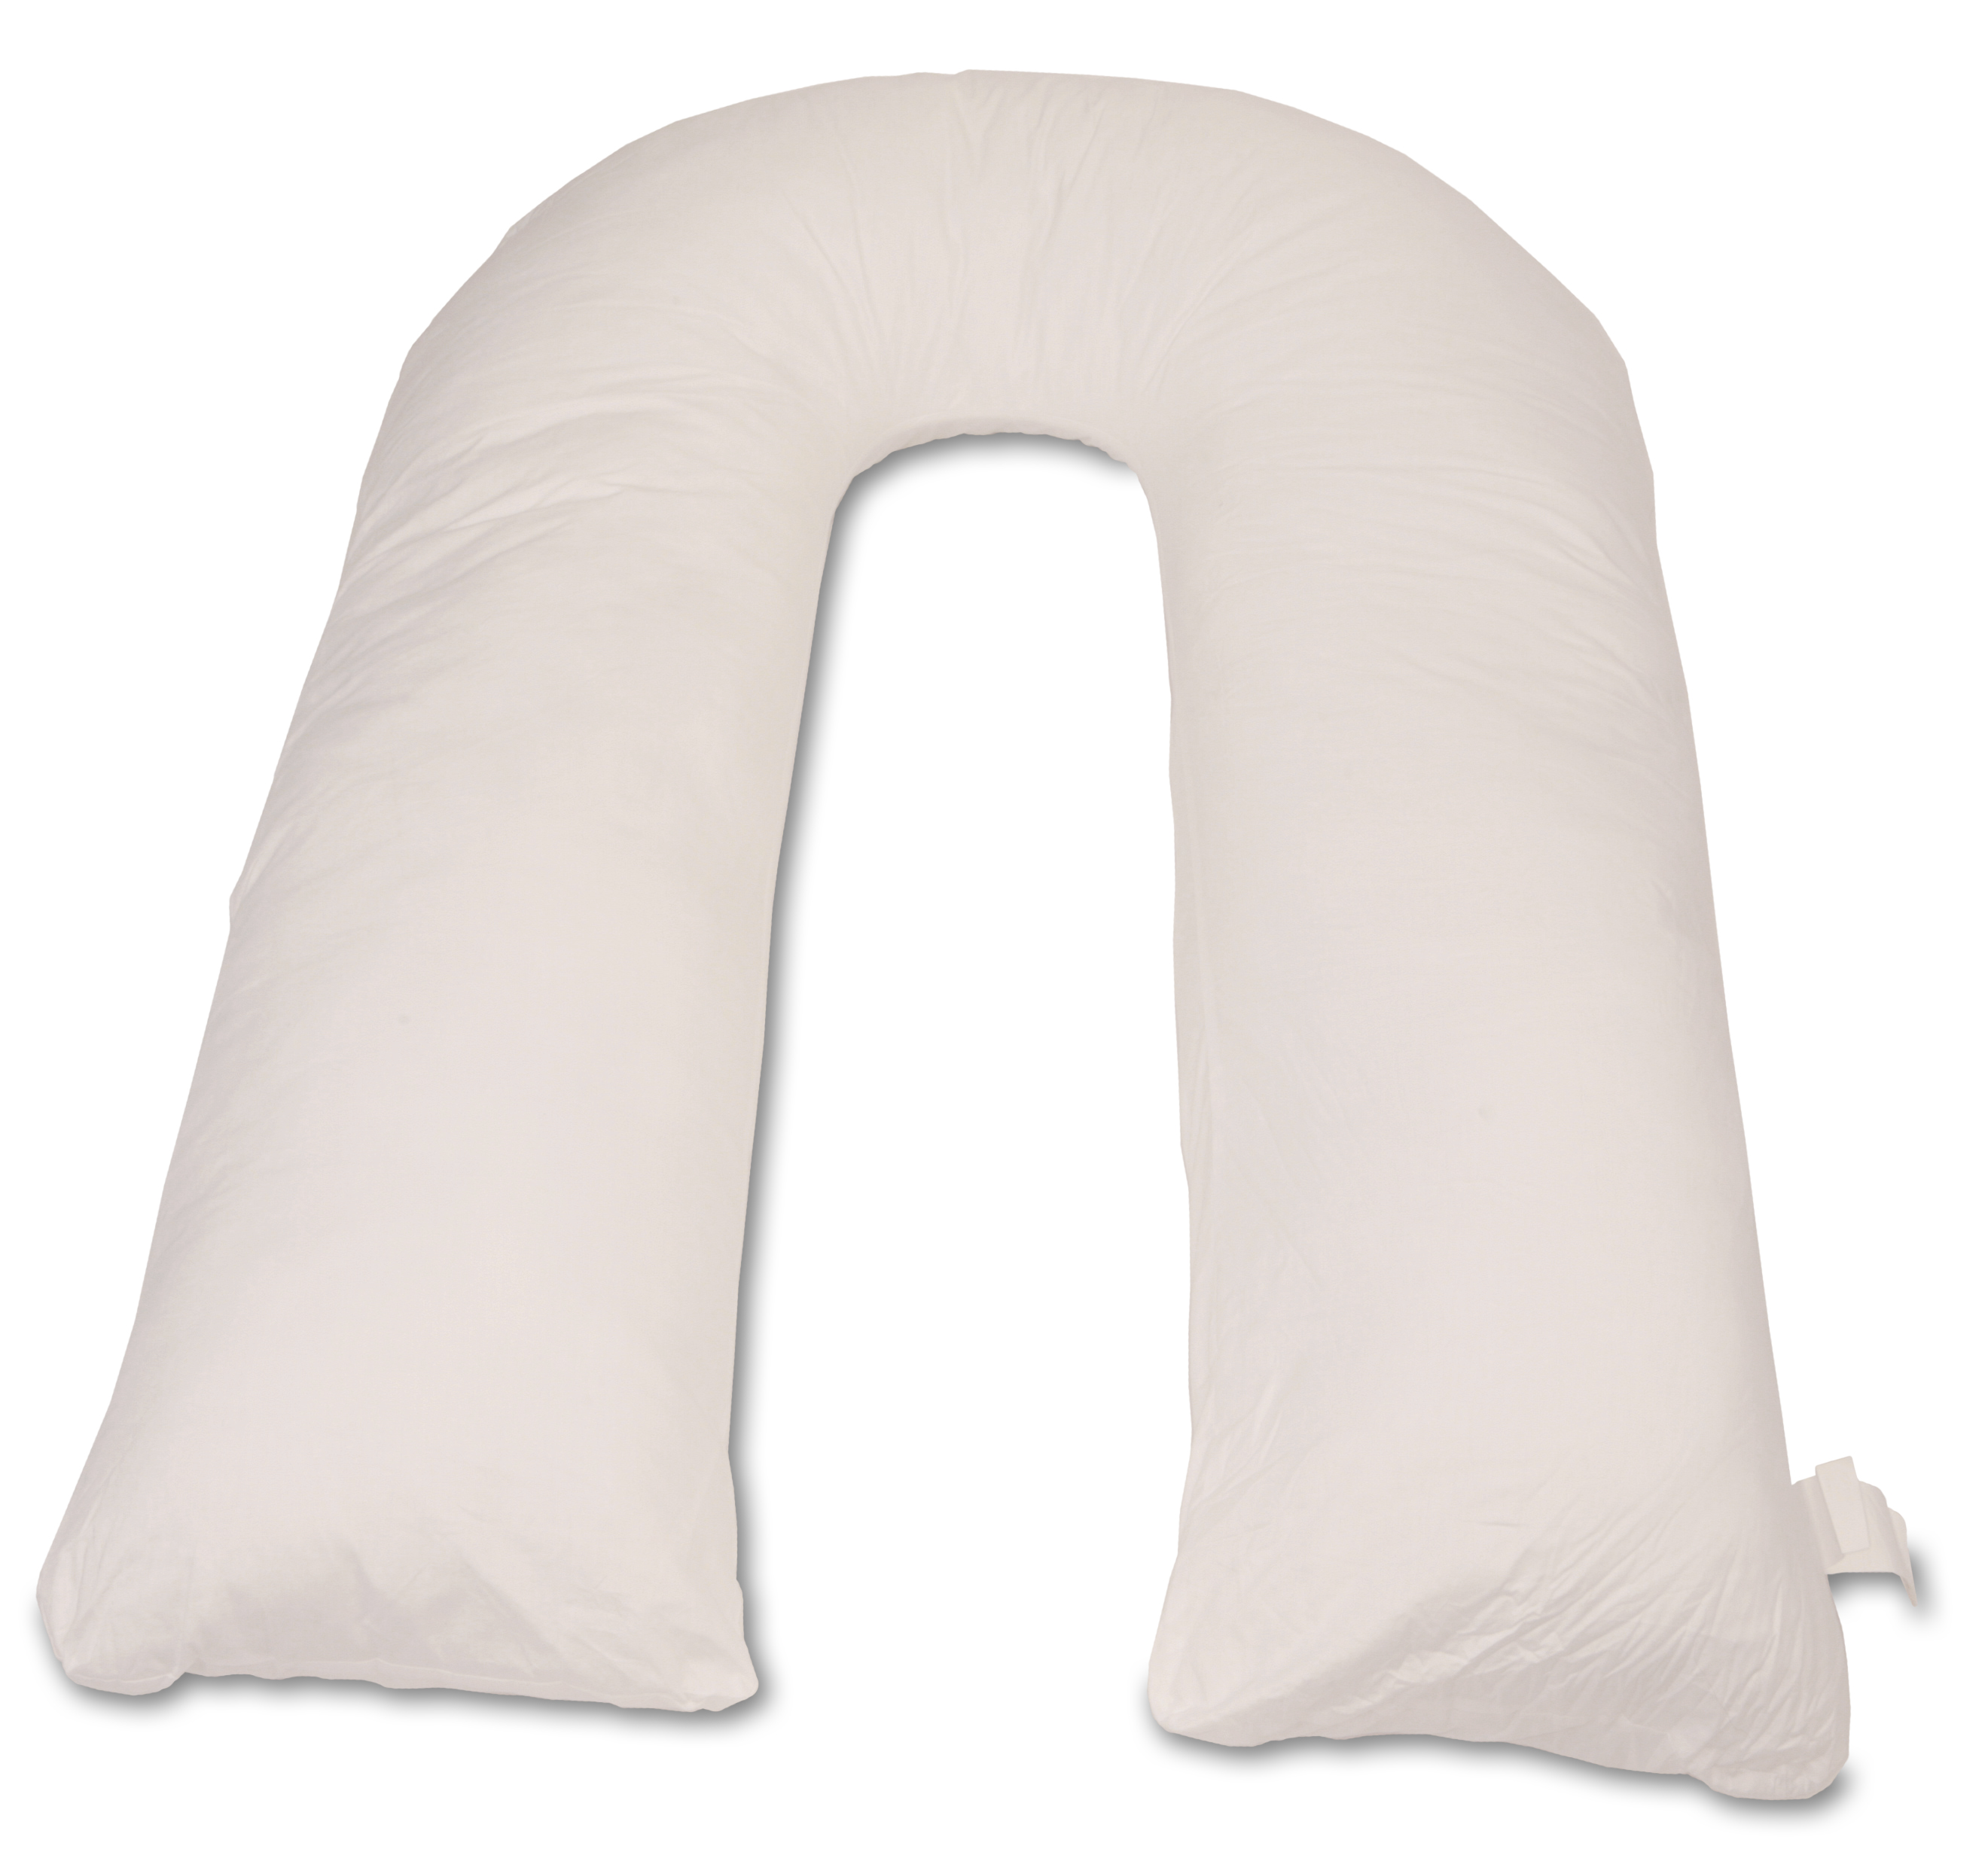 DeluxeComfort U Shaped Body Pillow 